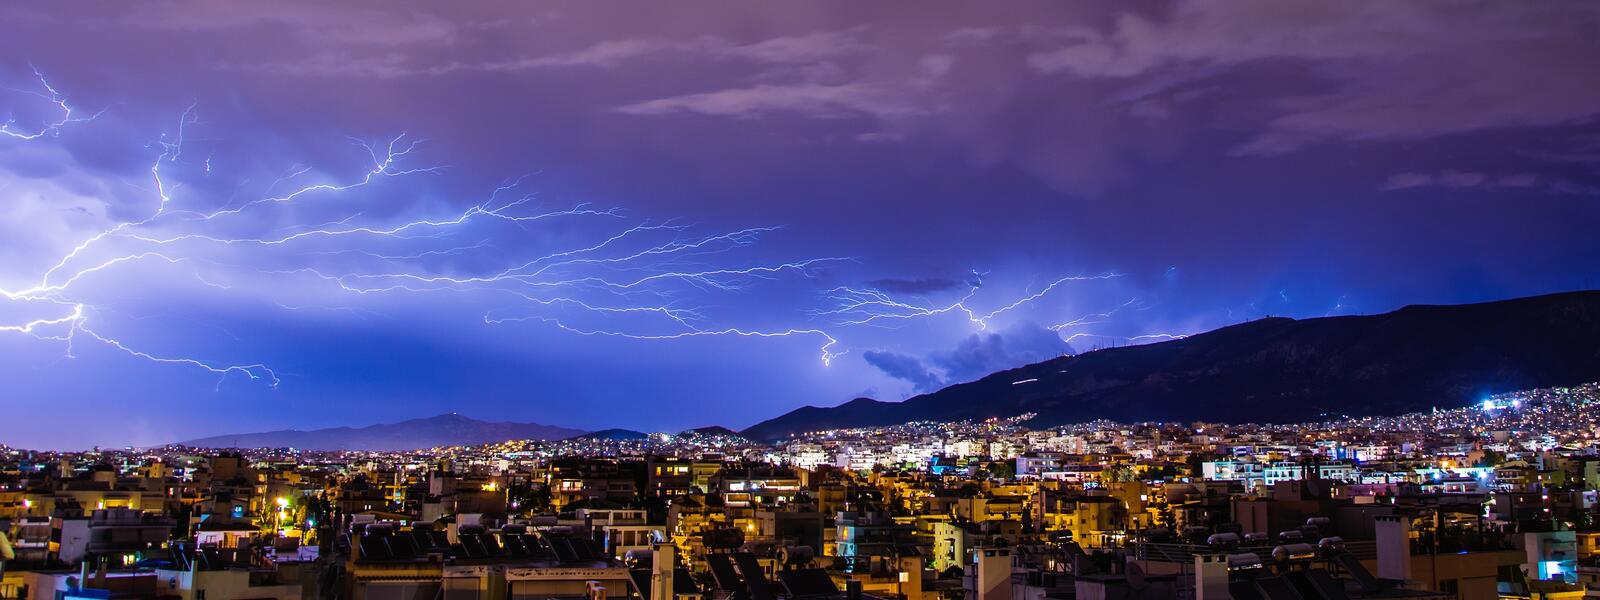 Free photo A thunderstorm over the city at night